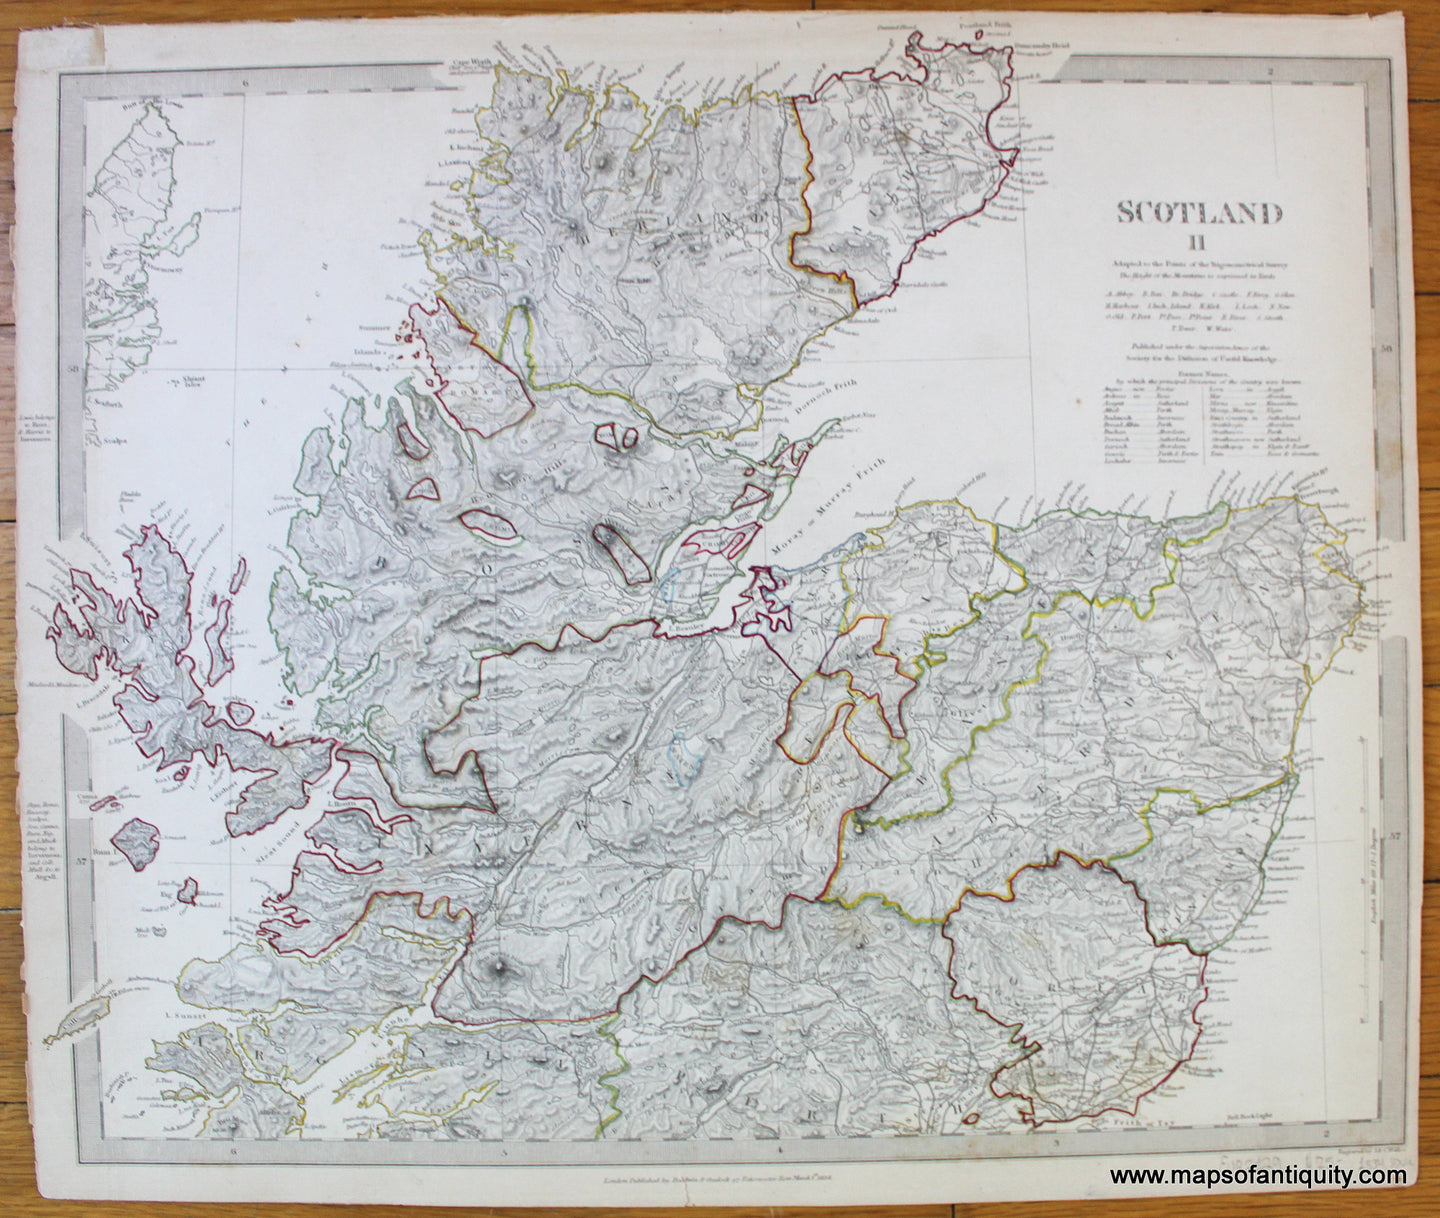 Antique-Hand-Colored-Map-Scotland-II-**********-Europe-Scotland-1834-SDUK/Society-for-the-Diffusion-of-Useful-Knowledge-Maps-Of-Antiquity